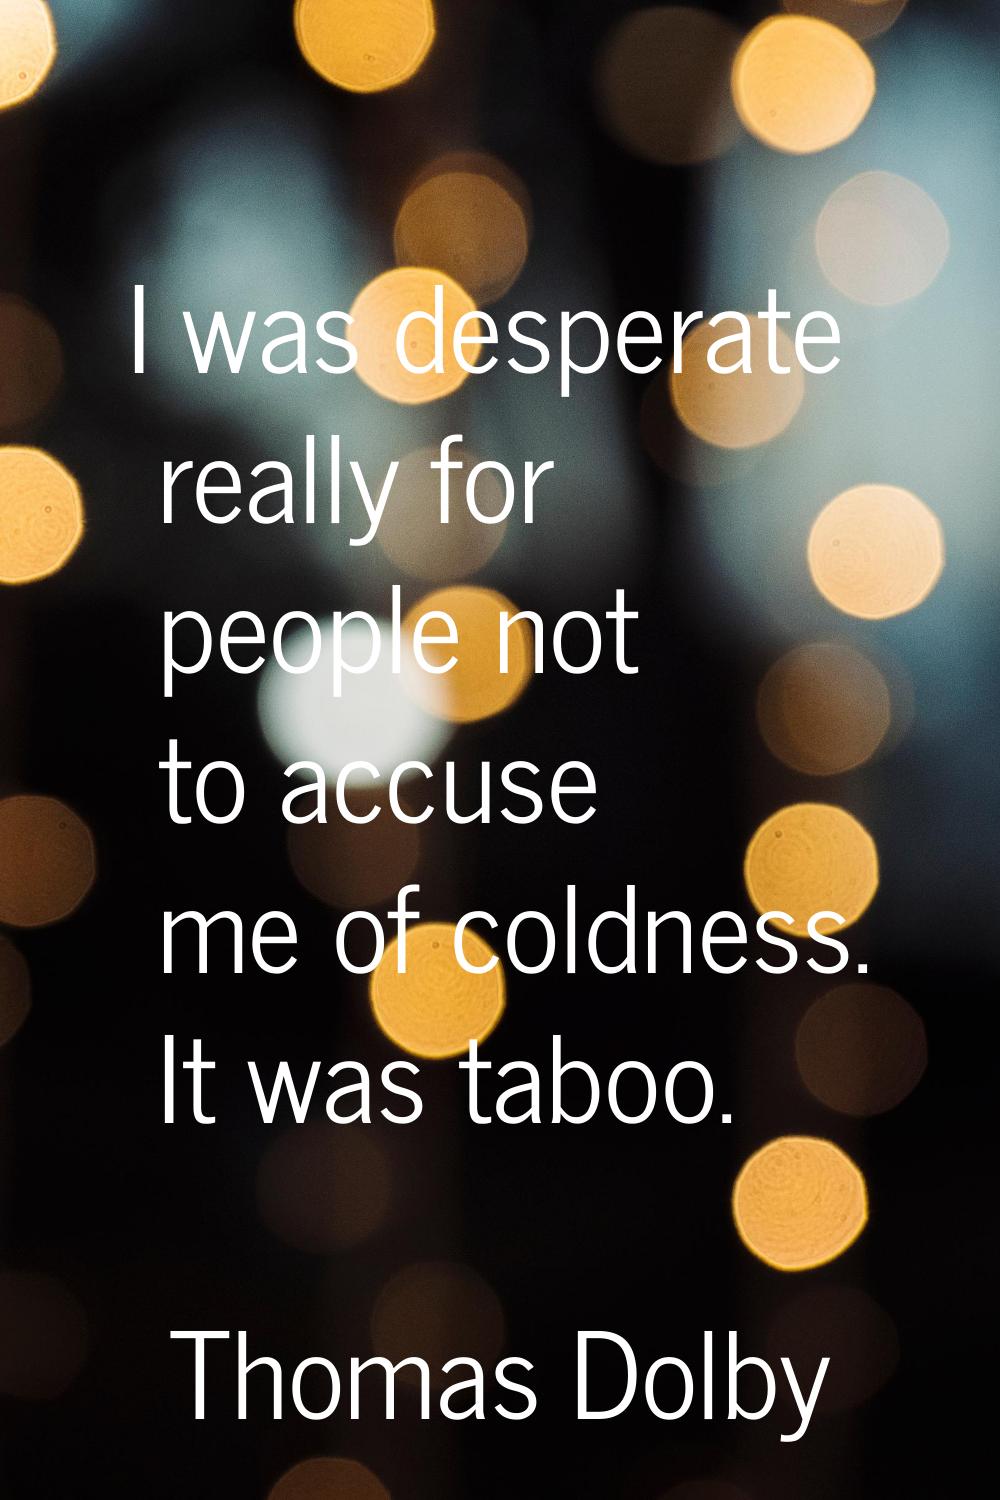 I was desperate really for people not to accuse me of coldness. It was taboo.